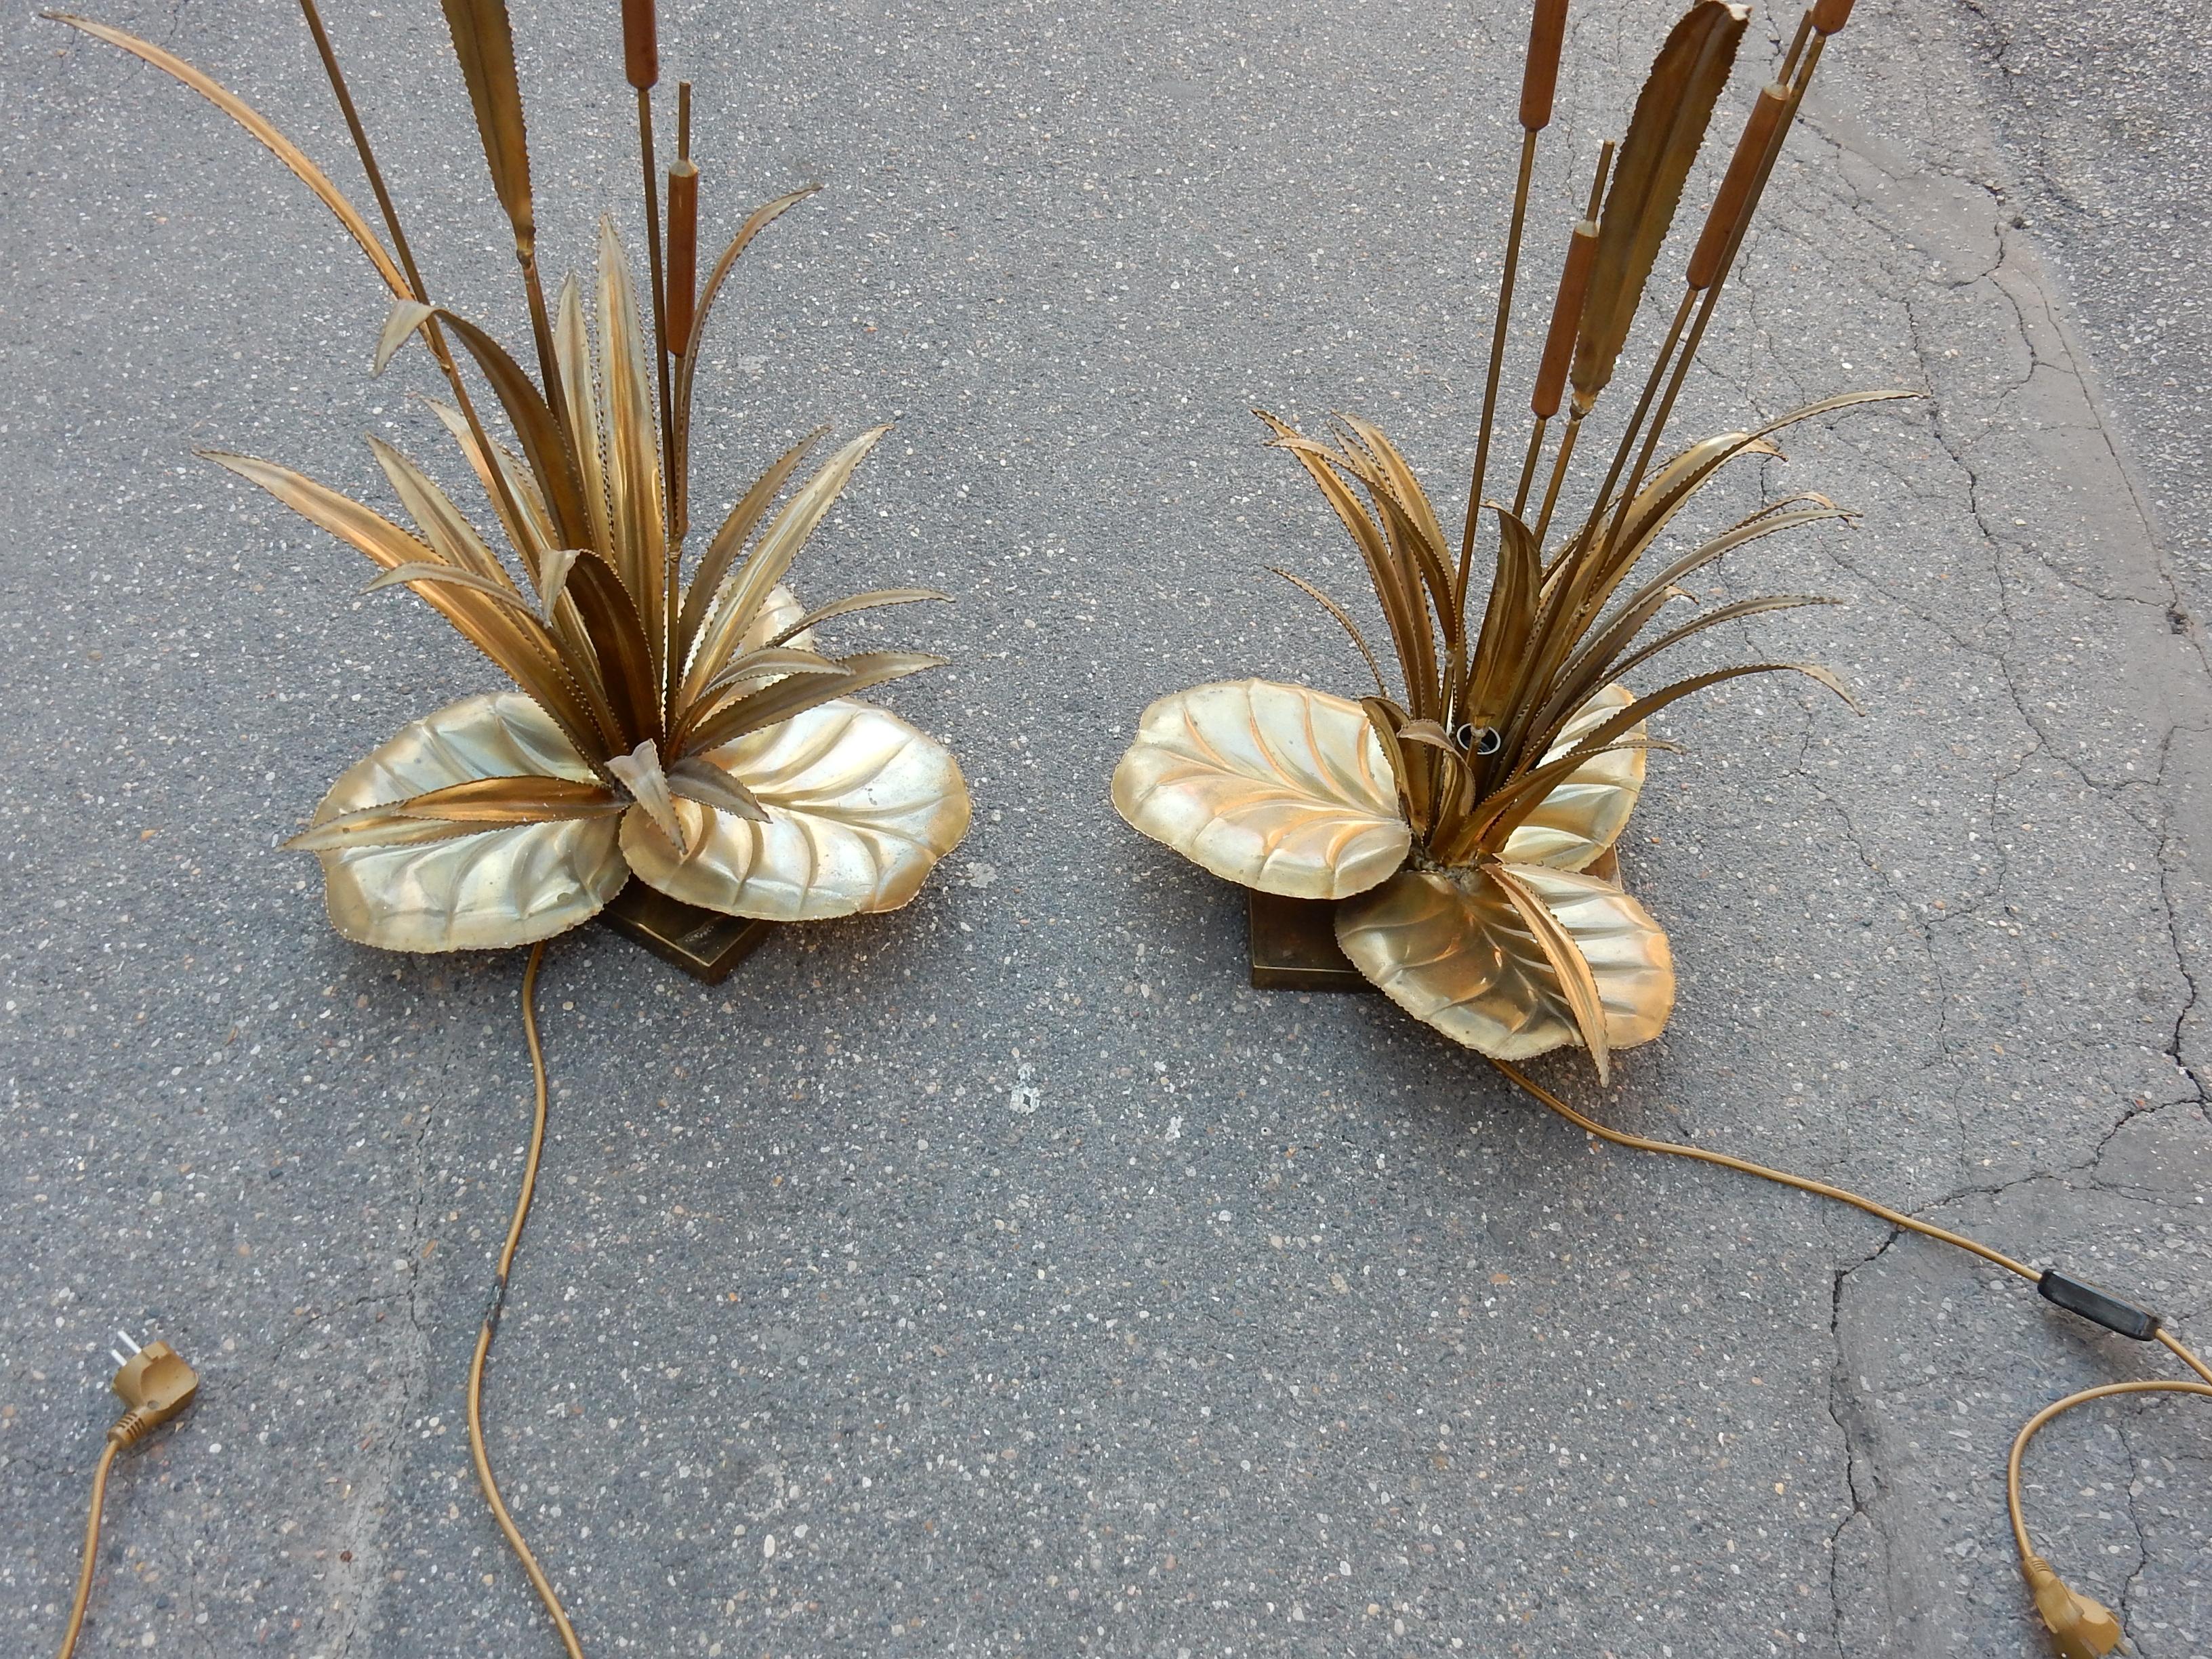 Pair of lamps in brass with 2 bulbs, reed decor, Maison Jansen style, circa 1970, good condition.